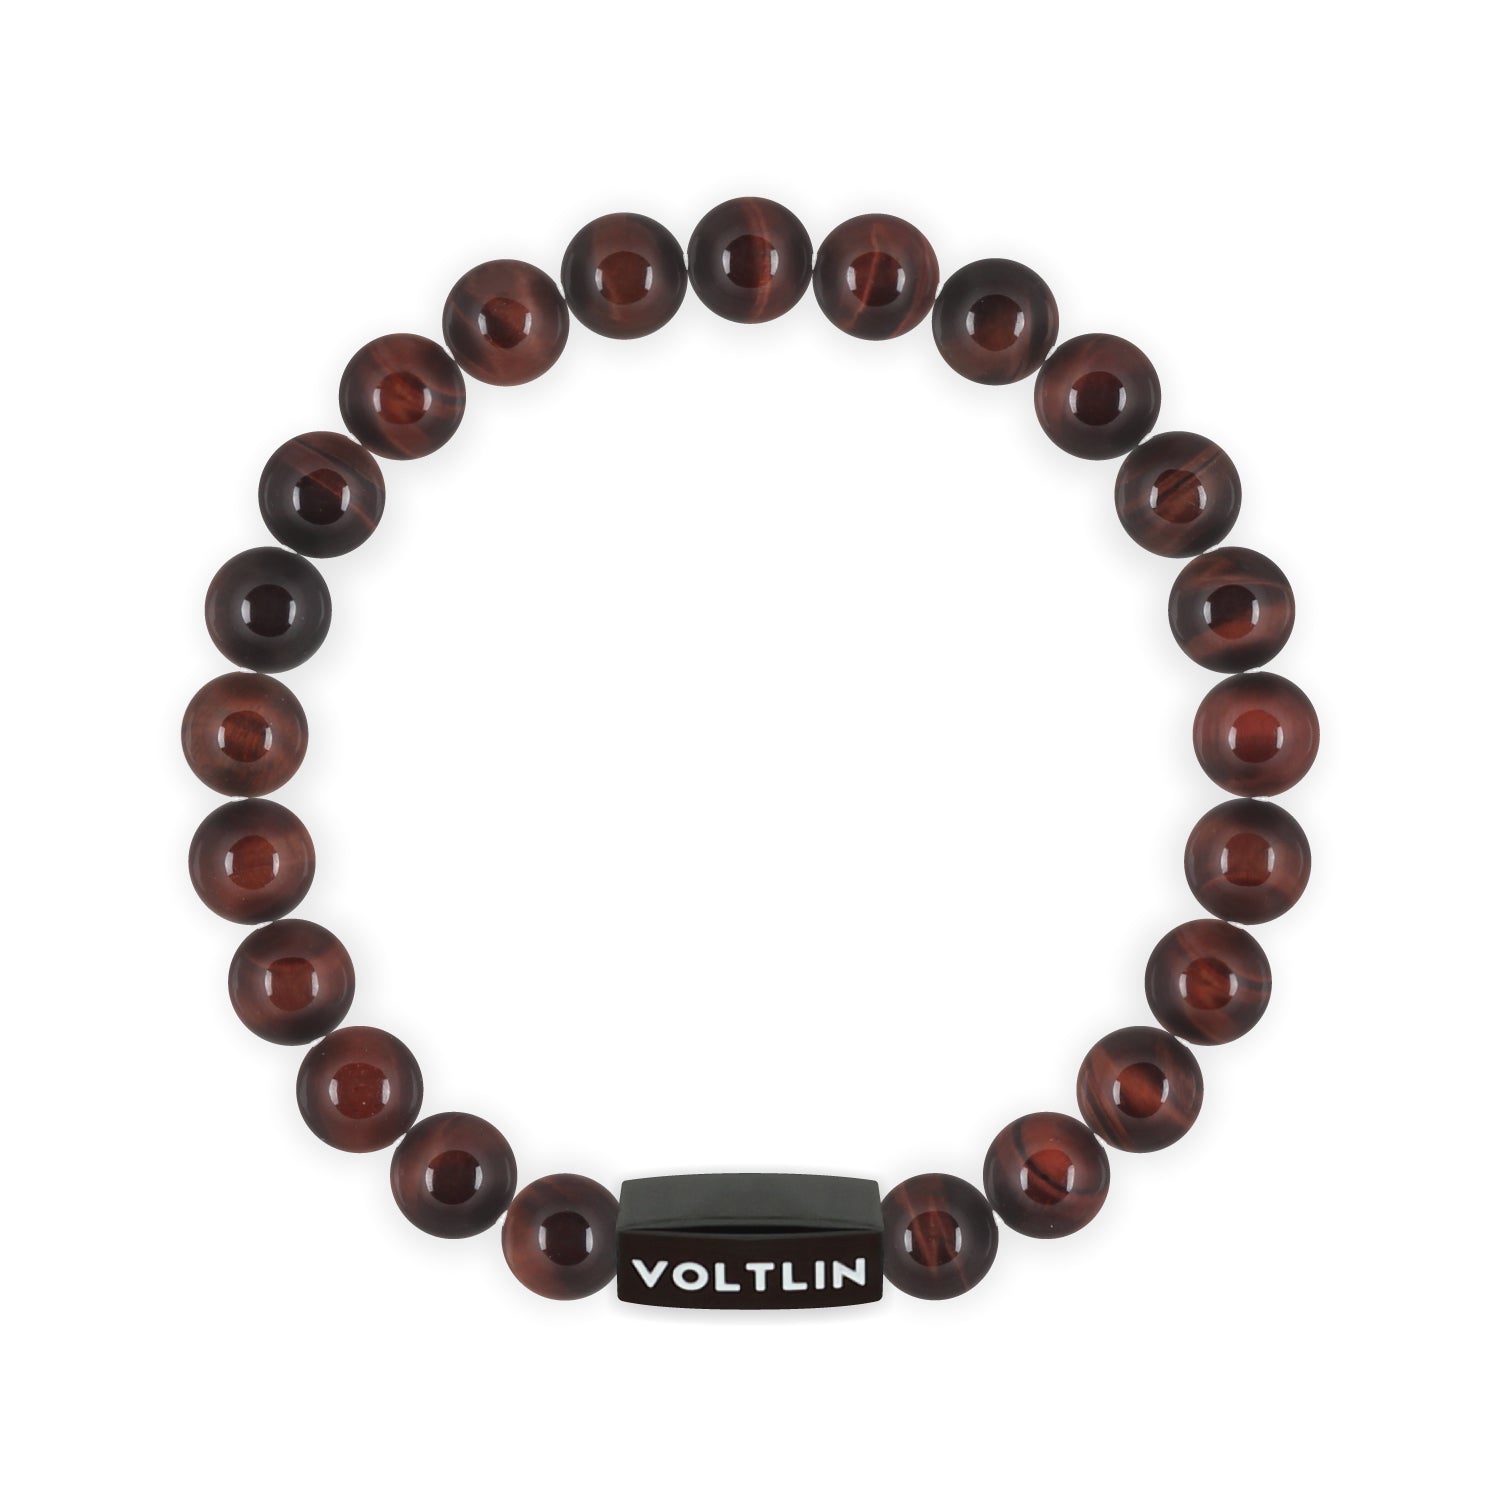 Front view of an 8mm Red Tigers Eye crystal beaded stretch bracelet with black stainless steel logo bead made by Voltlin